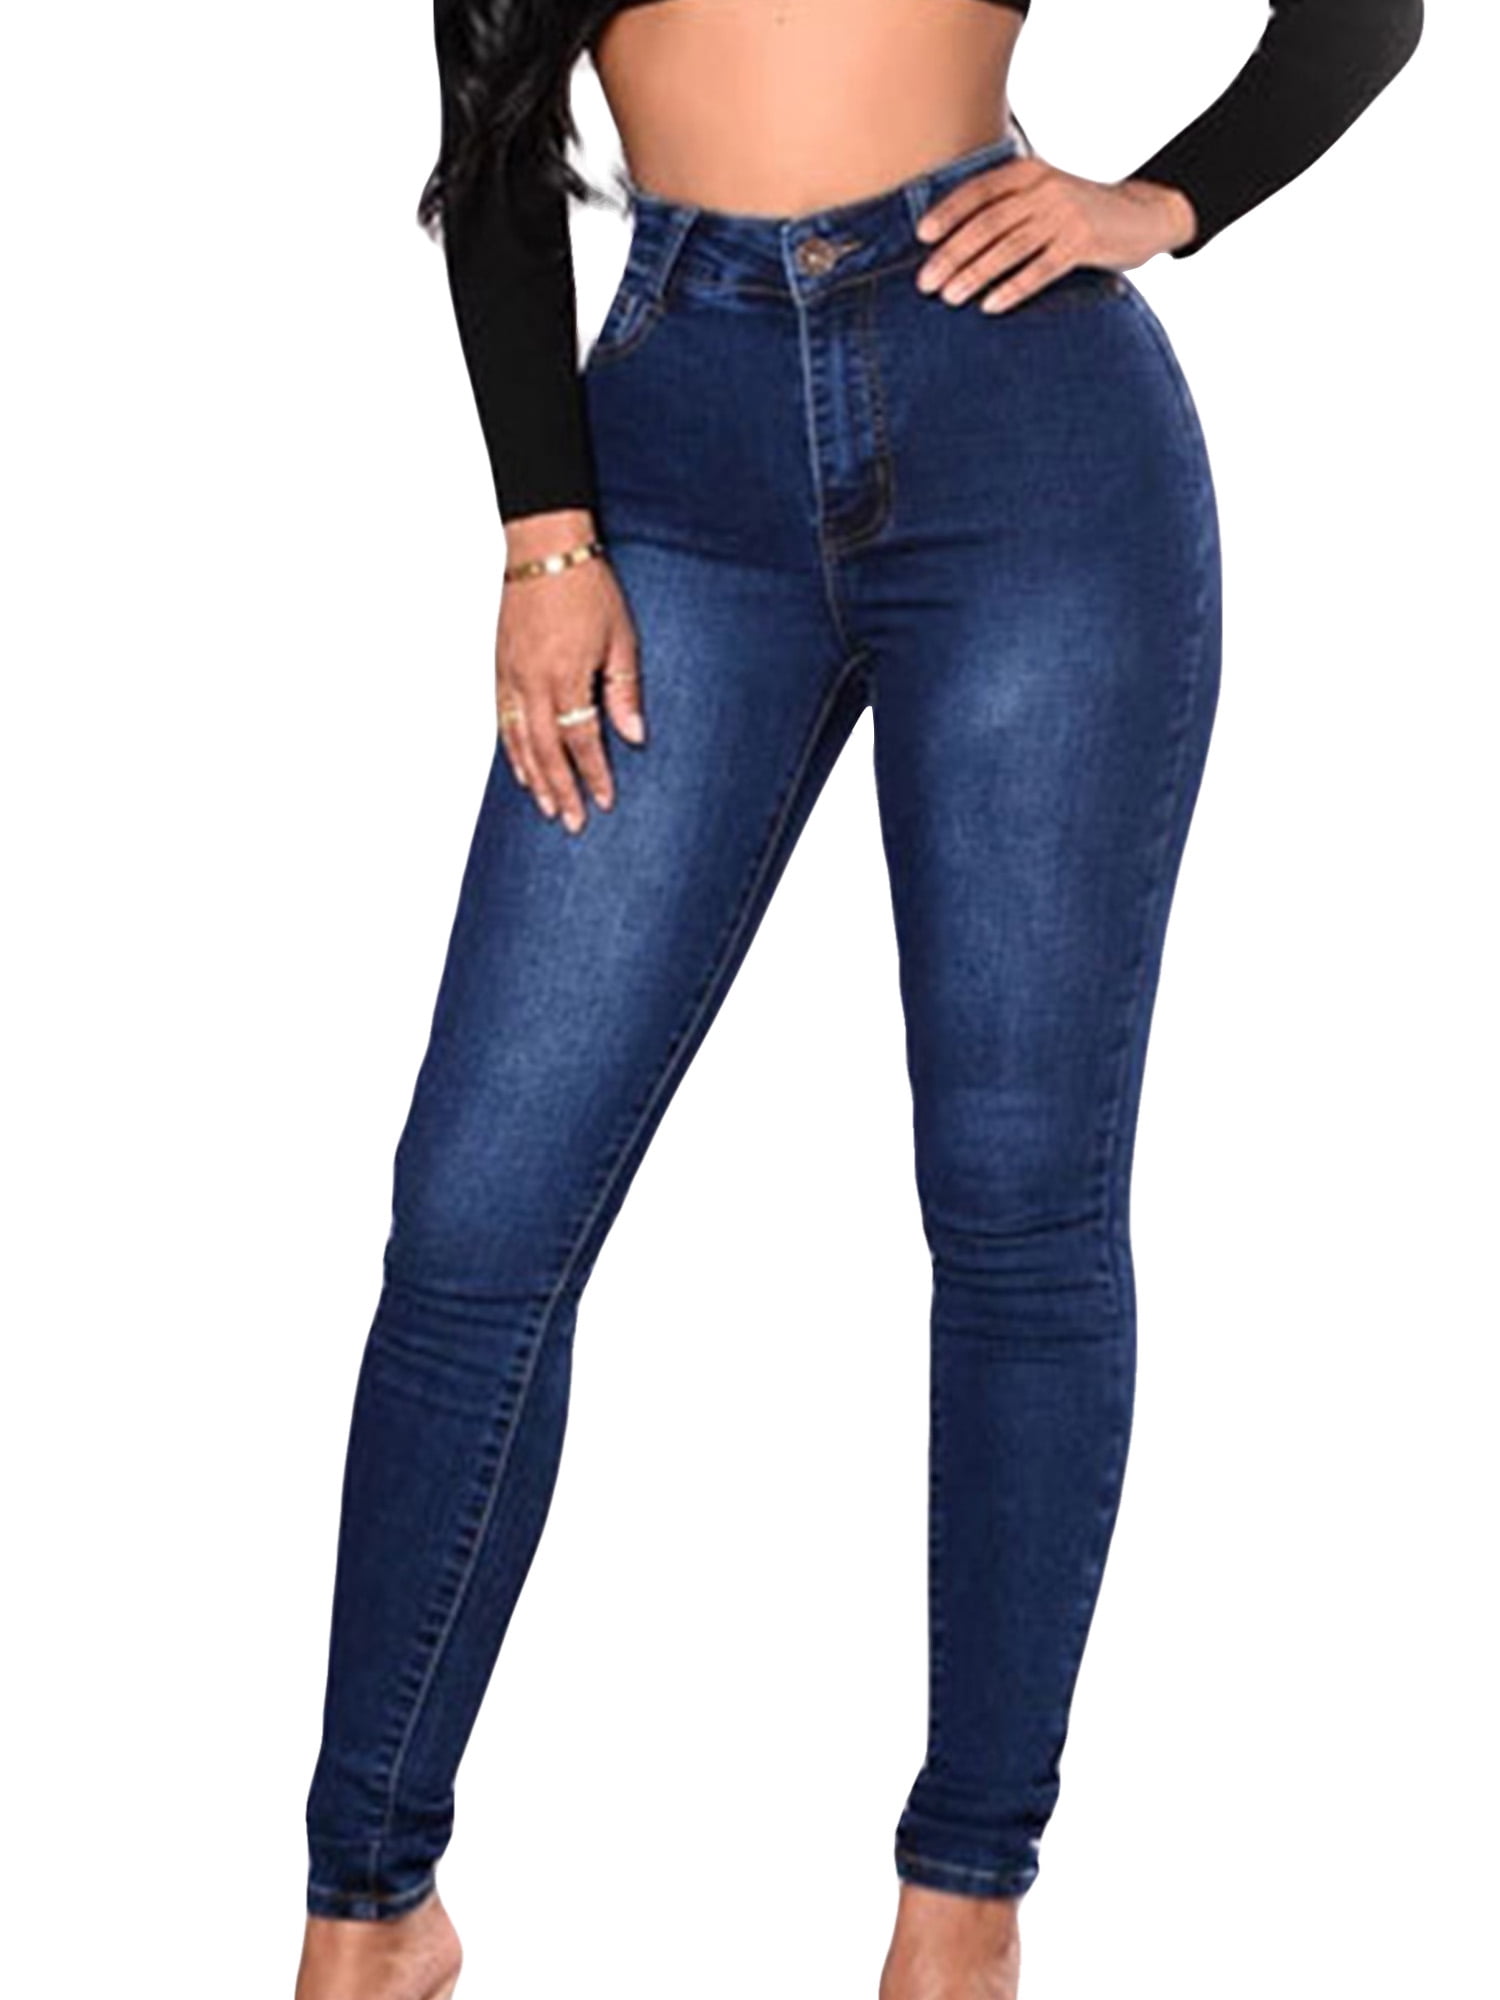 JUNIOR GIRLS STRETCHABLE BLUE FLEECE LINED SKINNY JEANS-SIZES-00 